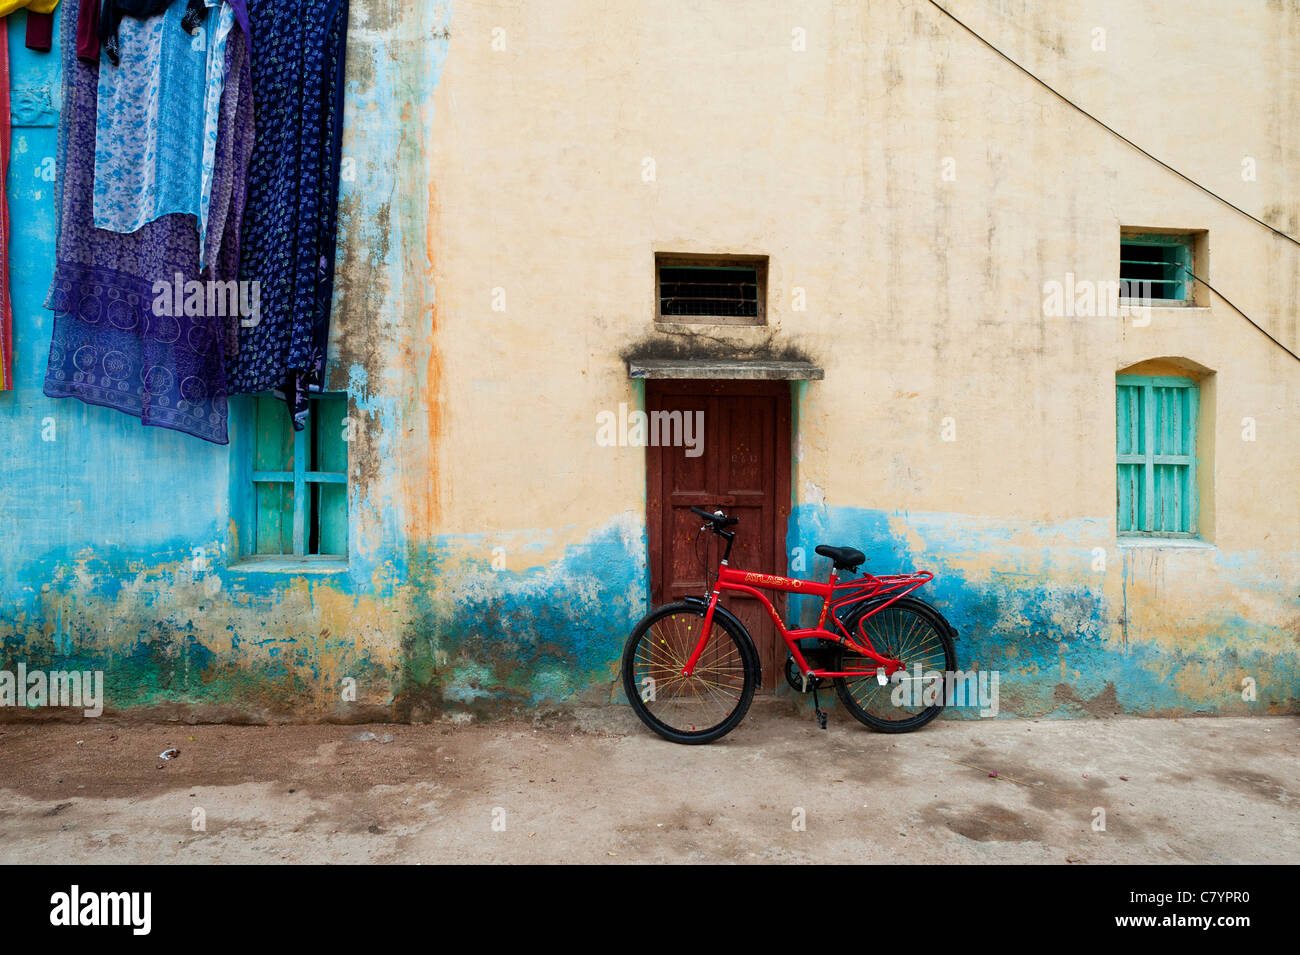 Red Indian bike leaning against a house in Indian street. Puttaparthi, Andhra Pradesh, India Stock Photo